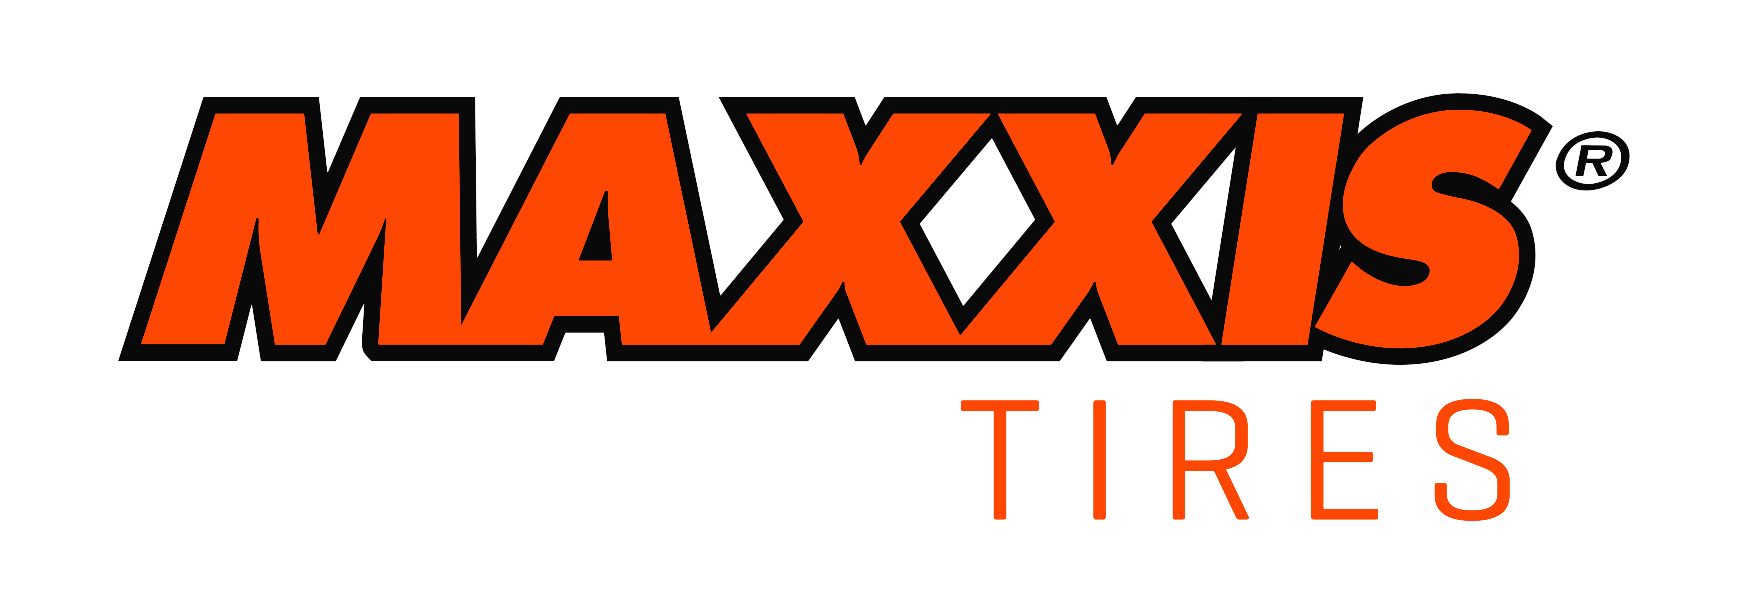 Maxxis Logo - Maxxis Tires Word Outlined's Group